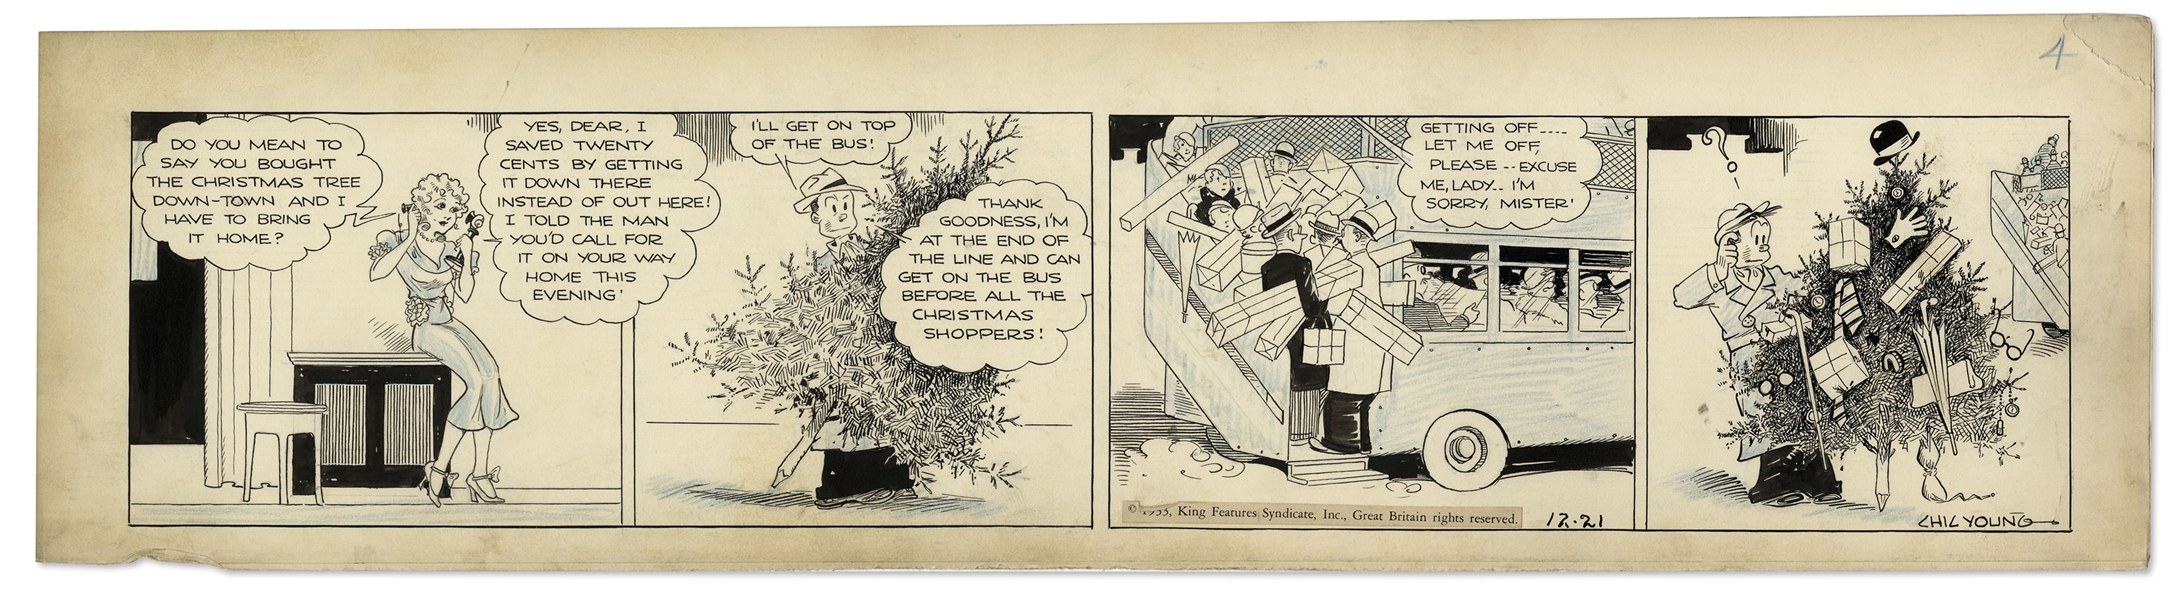 Chic Young Hand-Drawn ''Blondie'' Comic Strip From 1933 Titled ''There Is A Santa Claus'' -- Fun Strip Showing Dagwood Buying a Christmas Tree